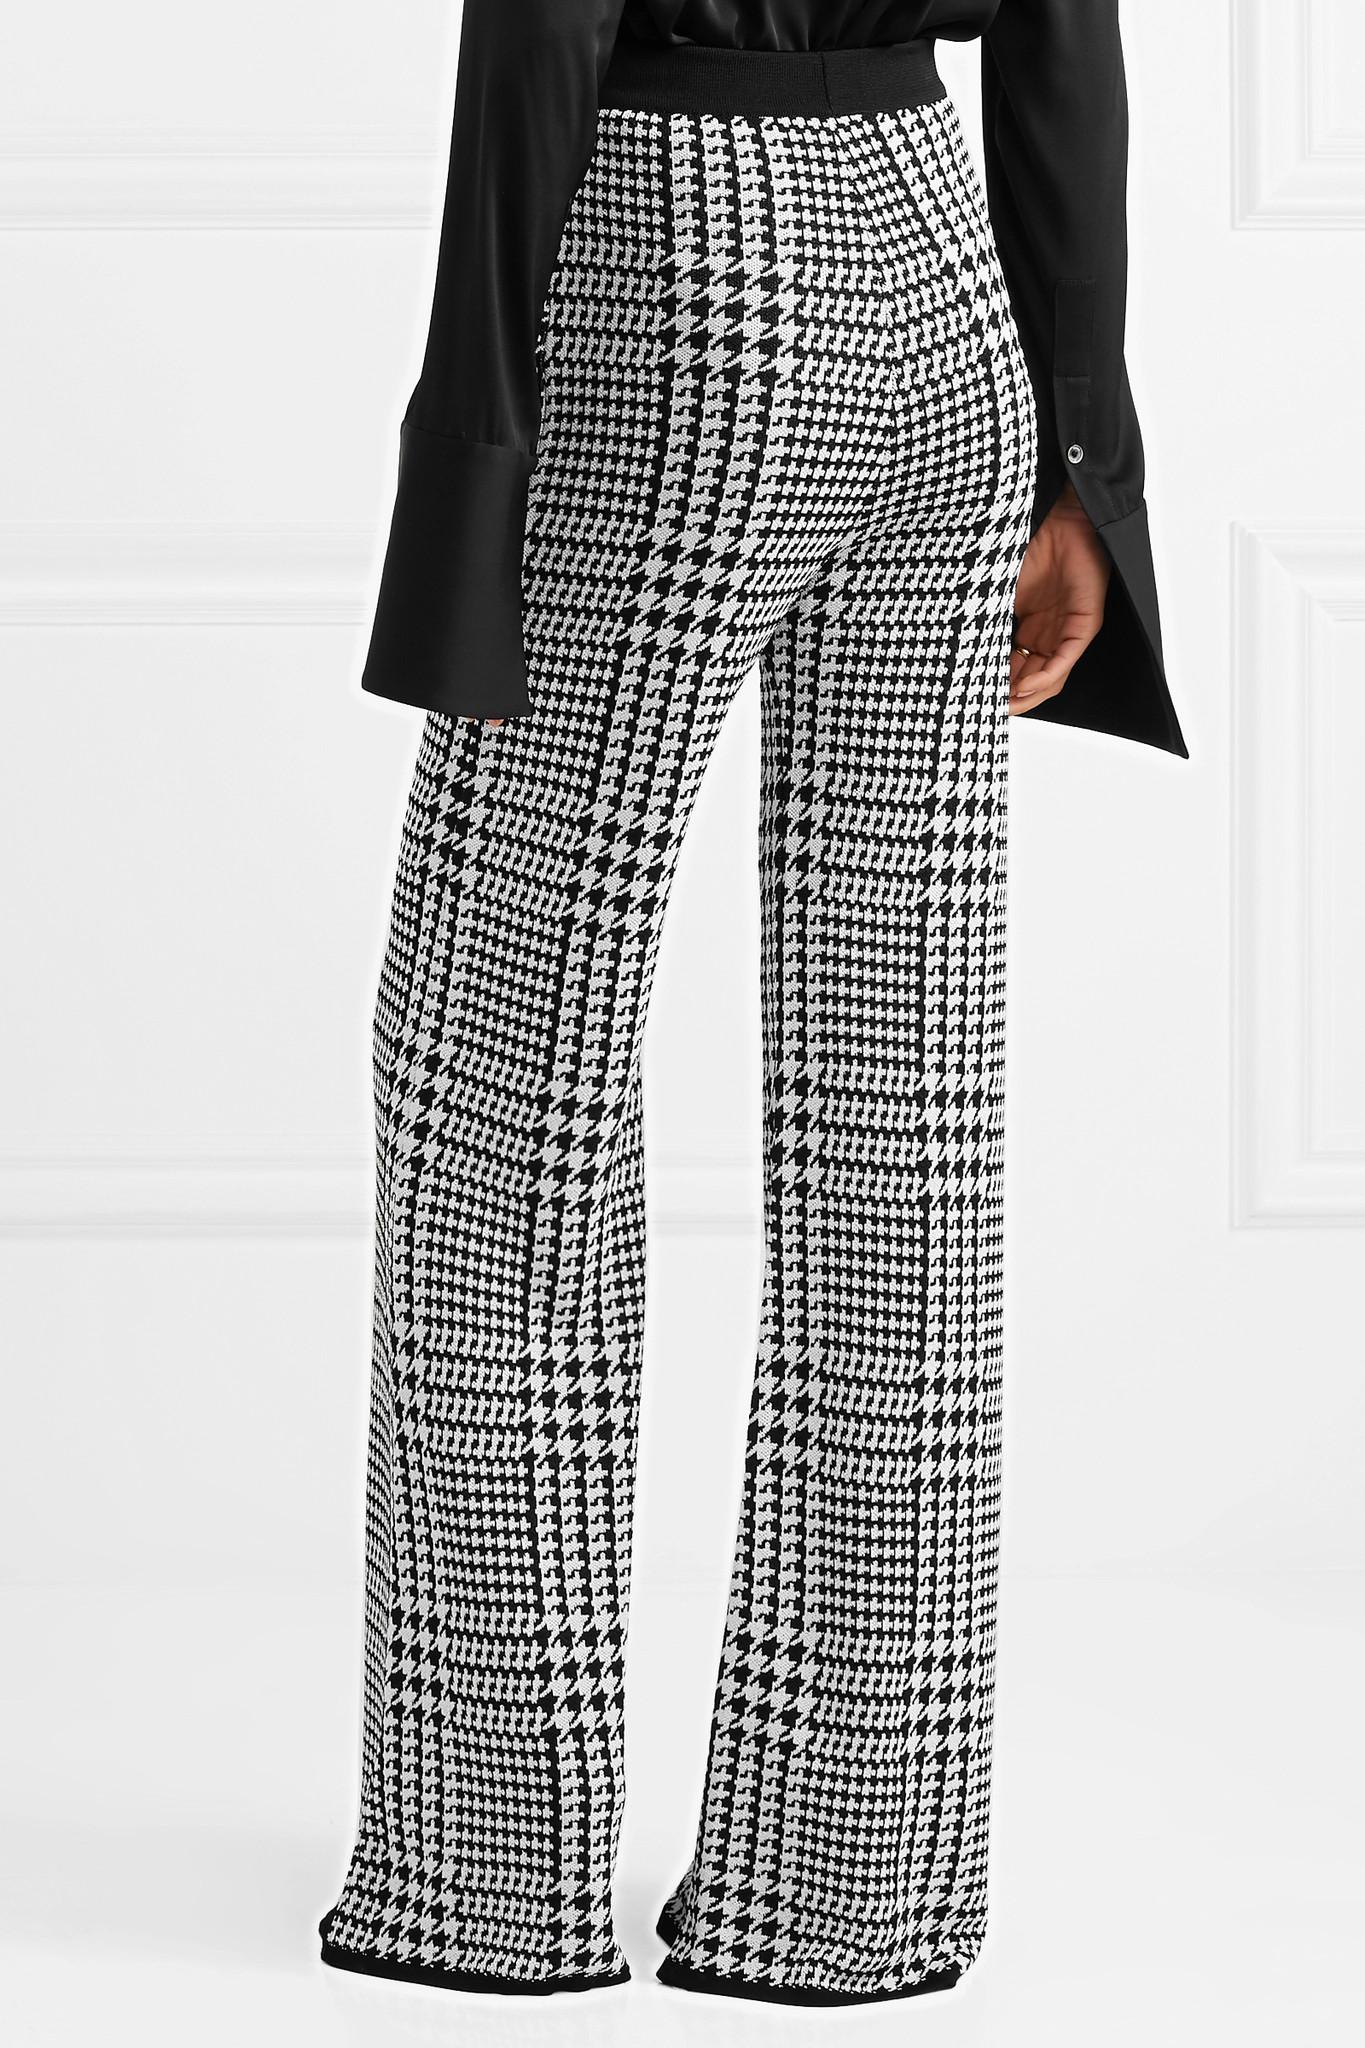 Lyst - Balmain Houndstooth Stretch-knit Wide-leg Pants in Black